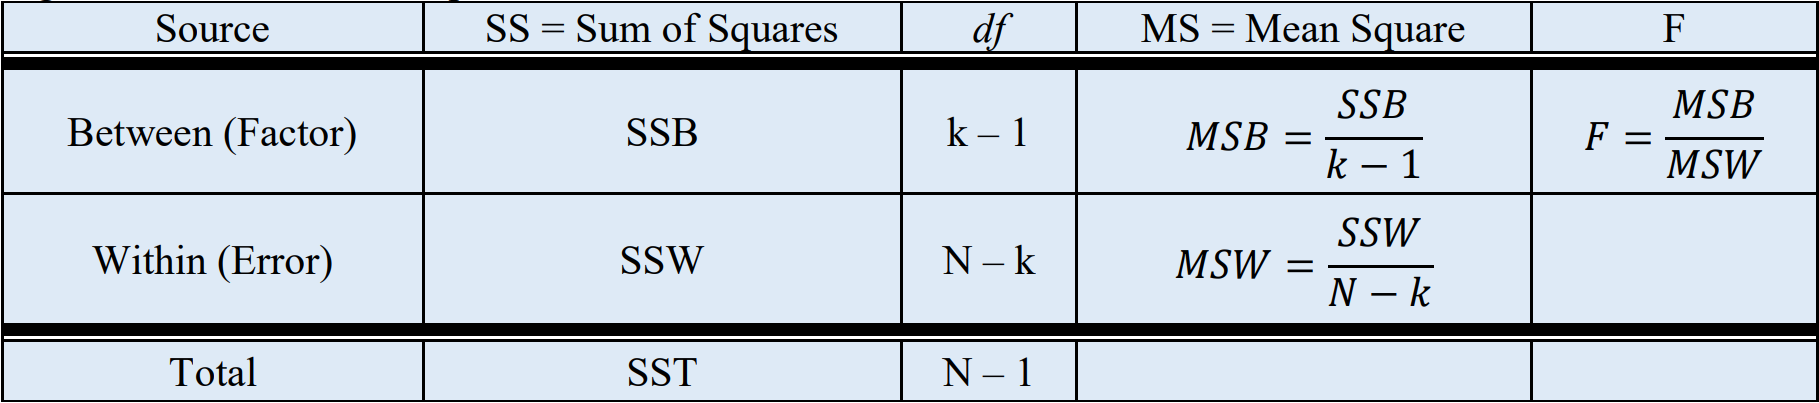 ANOVA table format and equations.